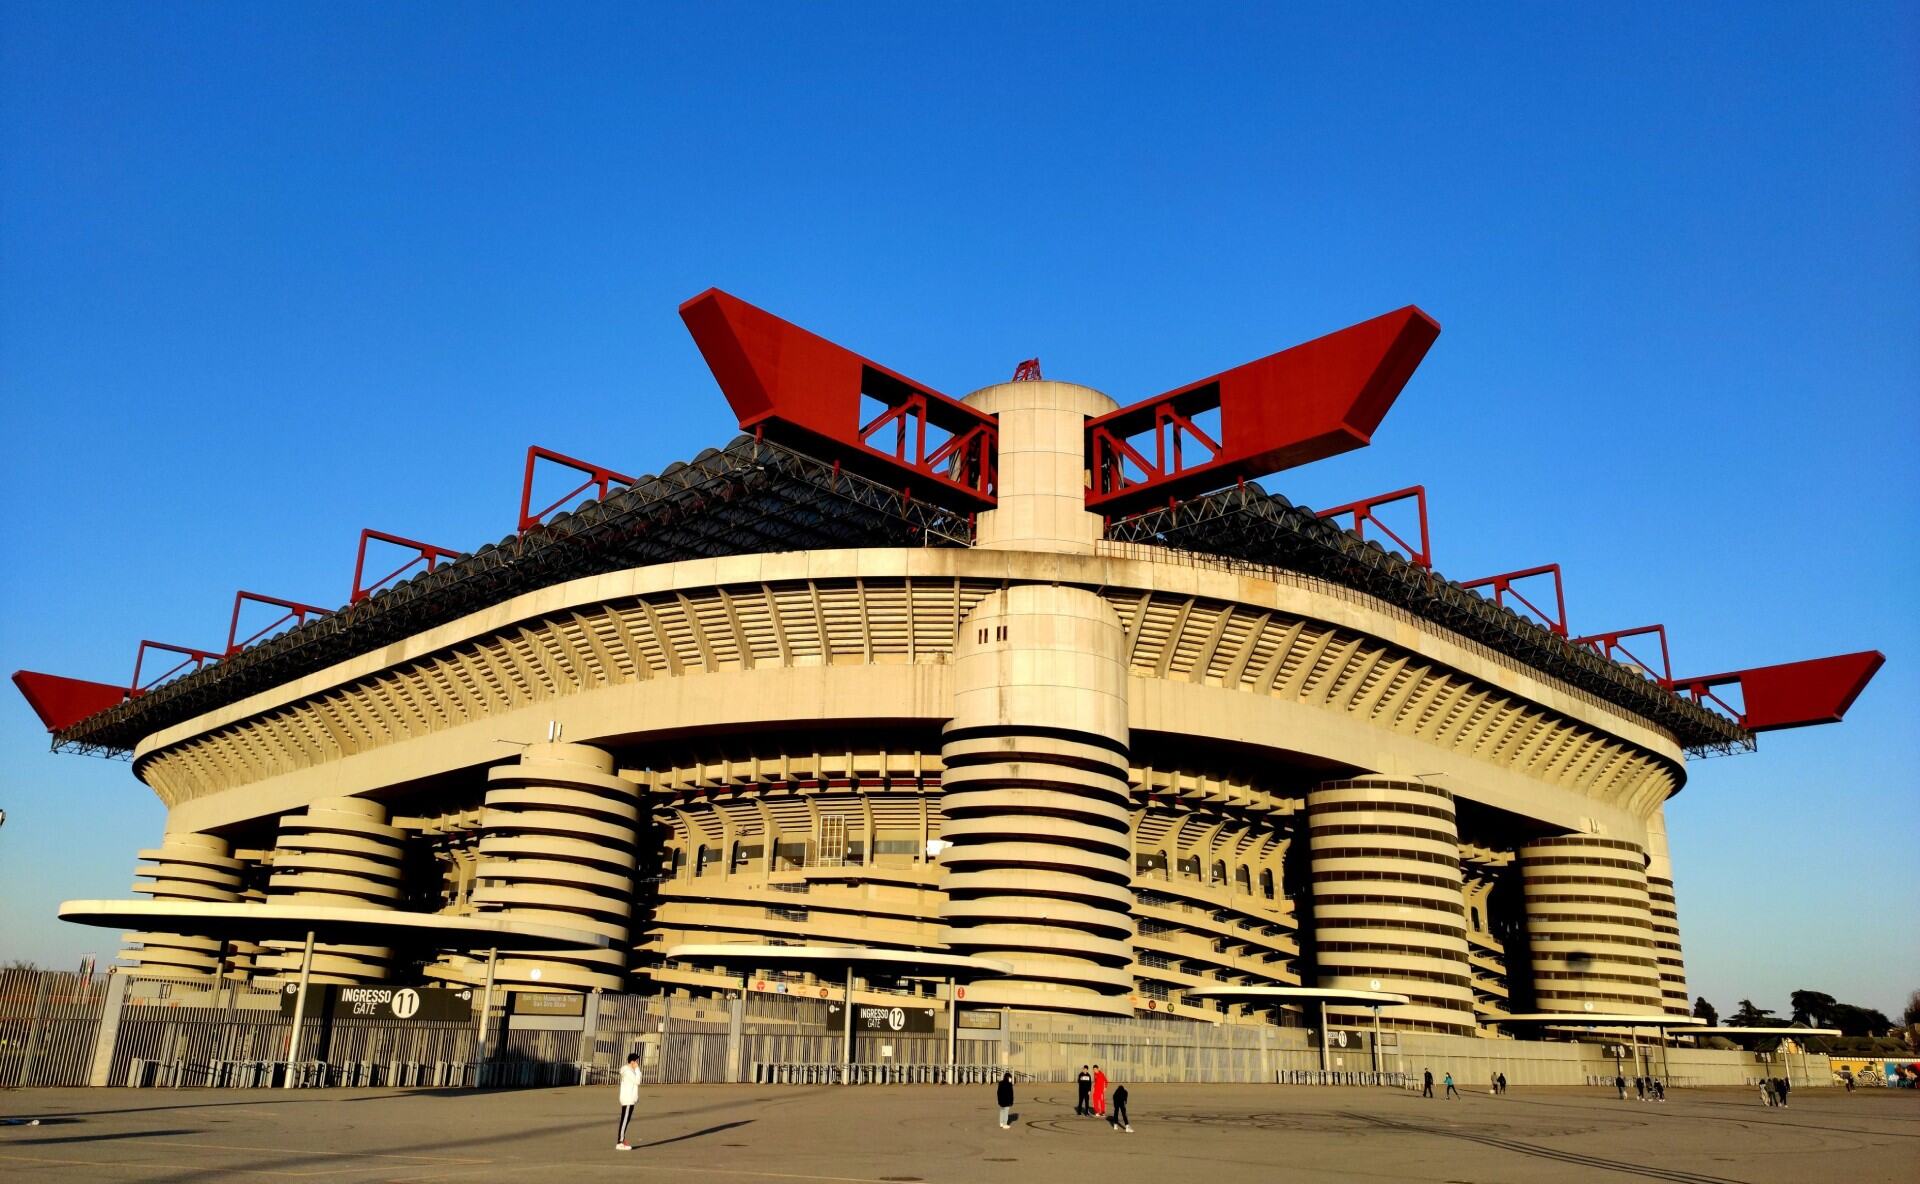 15-astonishing-facts-about-san-siro-also-known-as-giuseppe-meazza-stadium